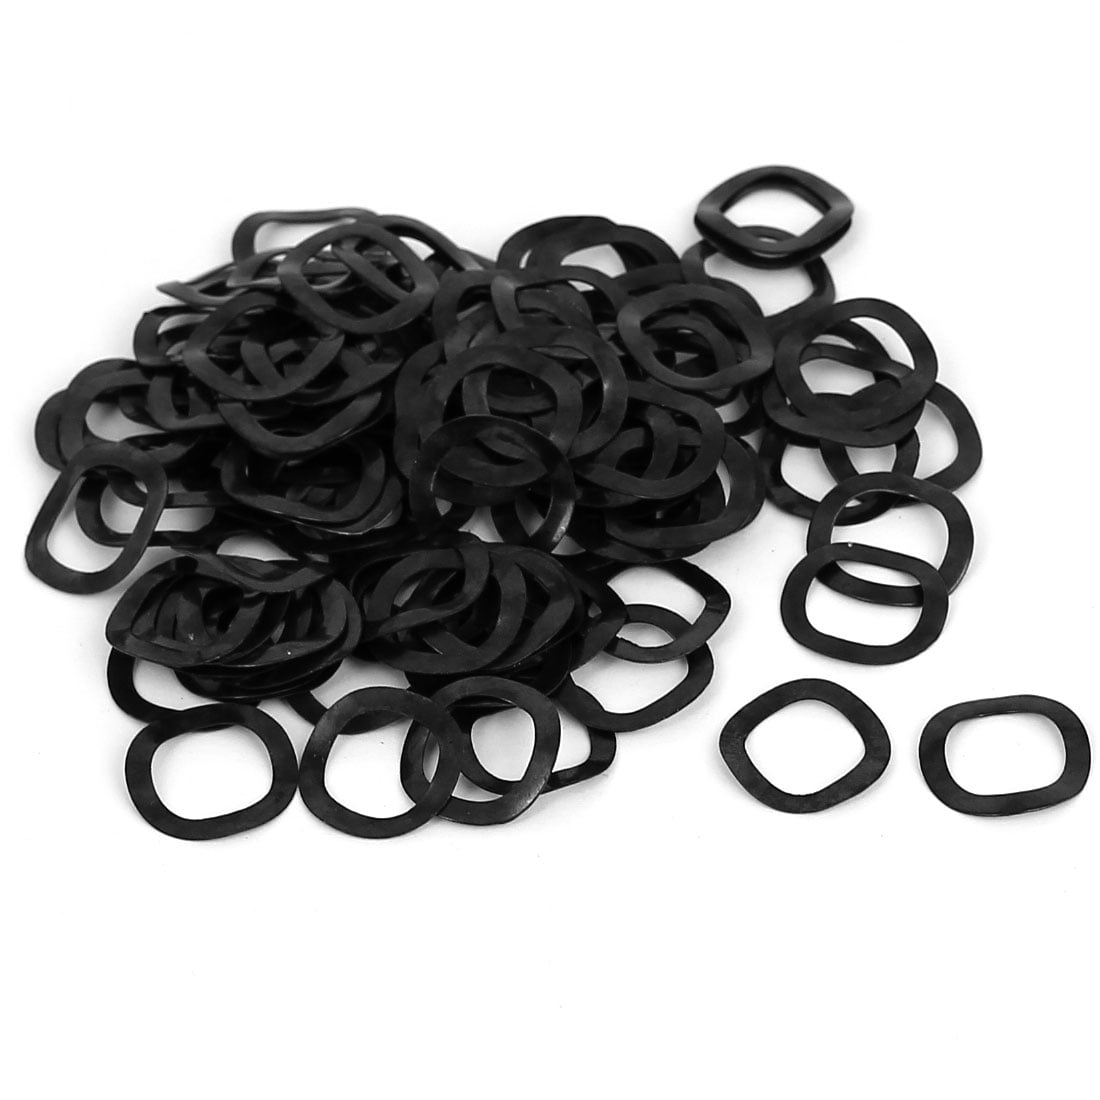 6mm x 12mm x 0.3mm Metal Wavy Wave Crinkle Spring Washers 100pcs